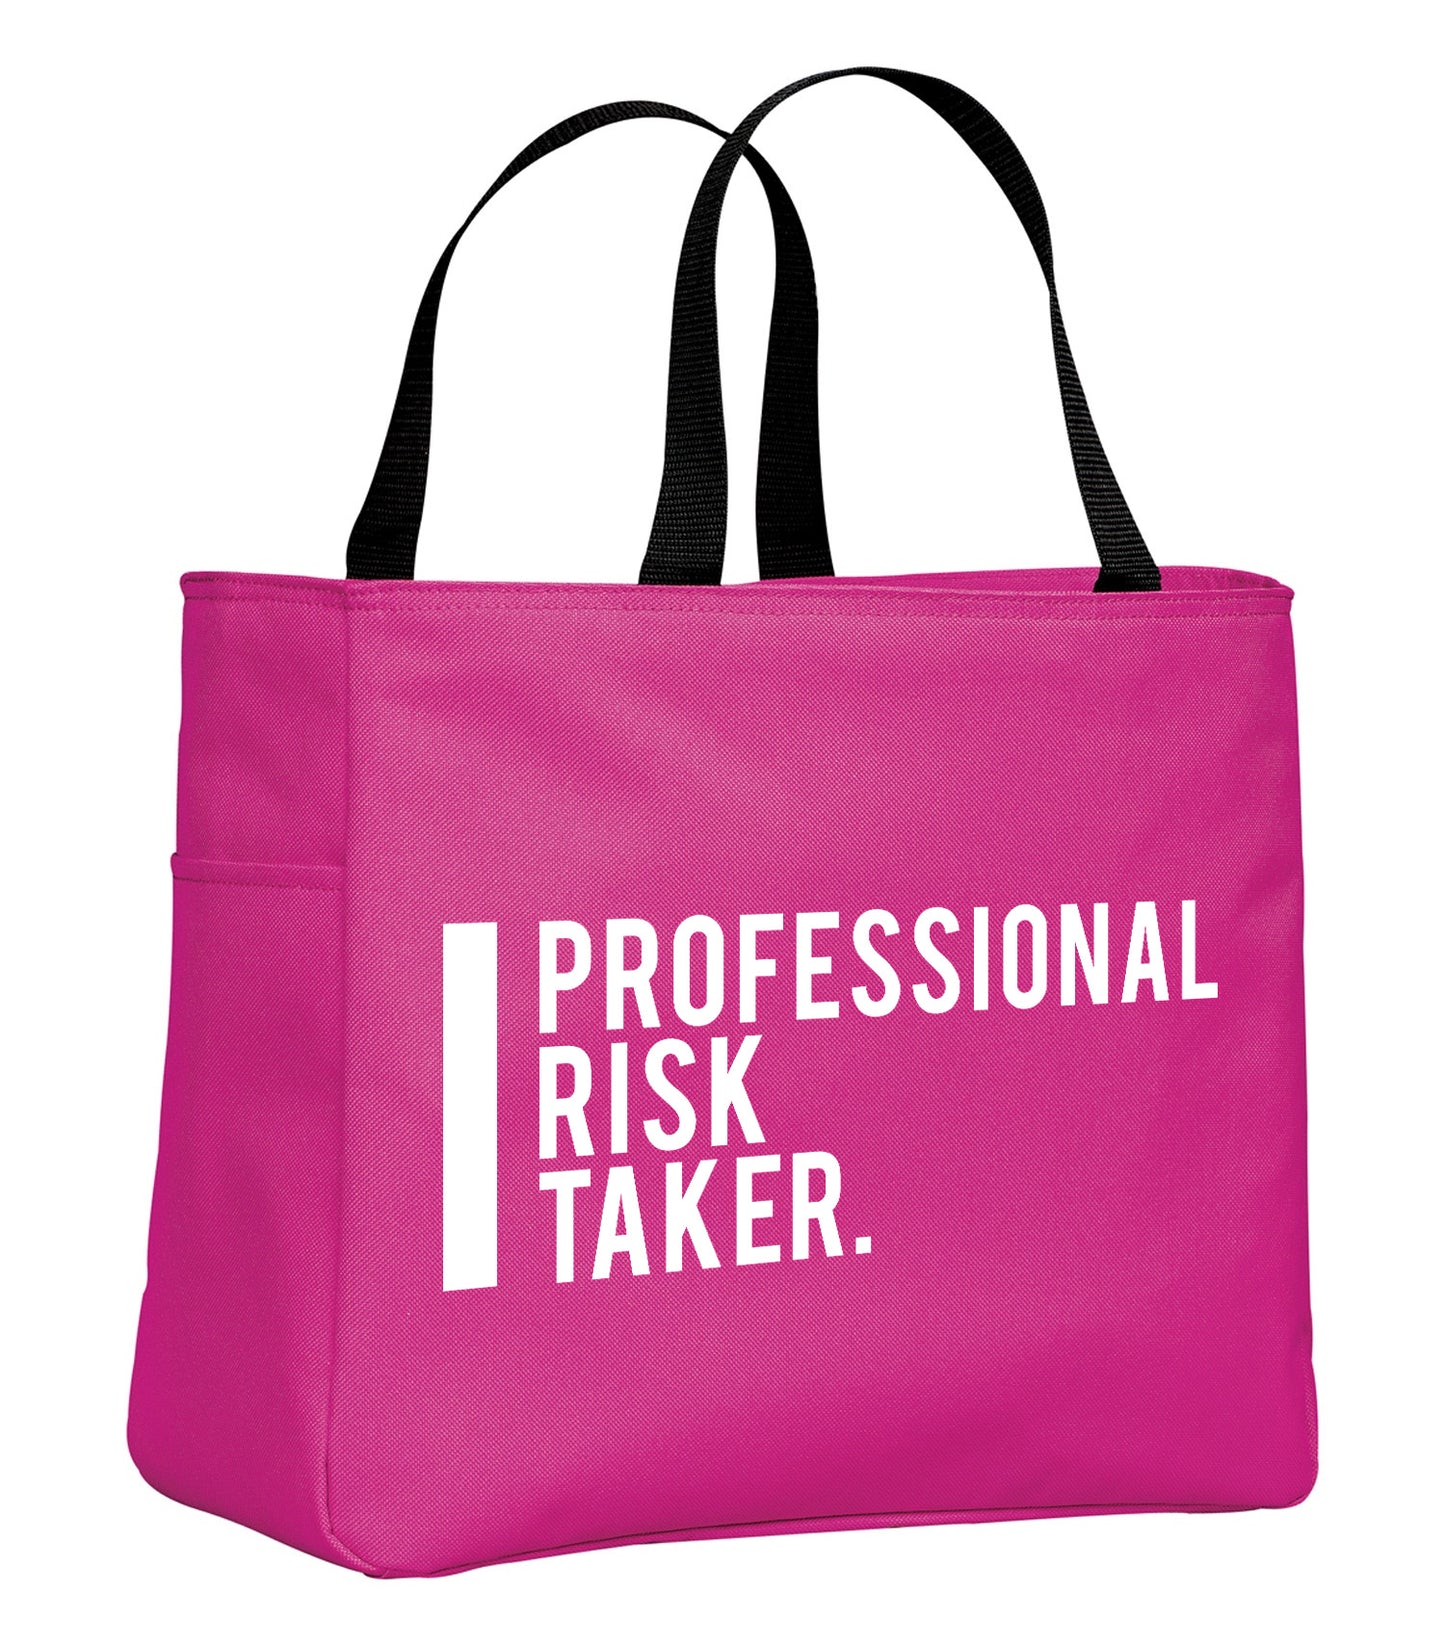 Project BOSS' "Professional Risk Taker" Tote Bag